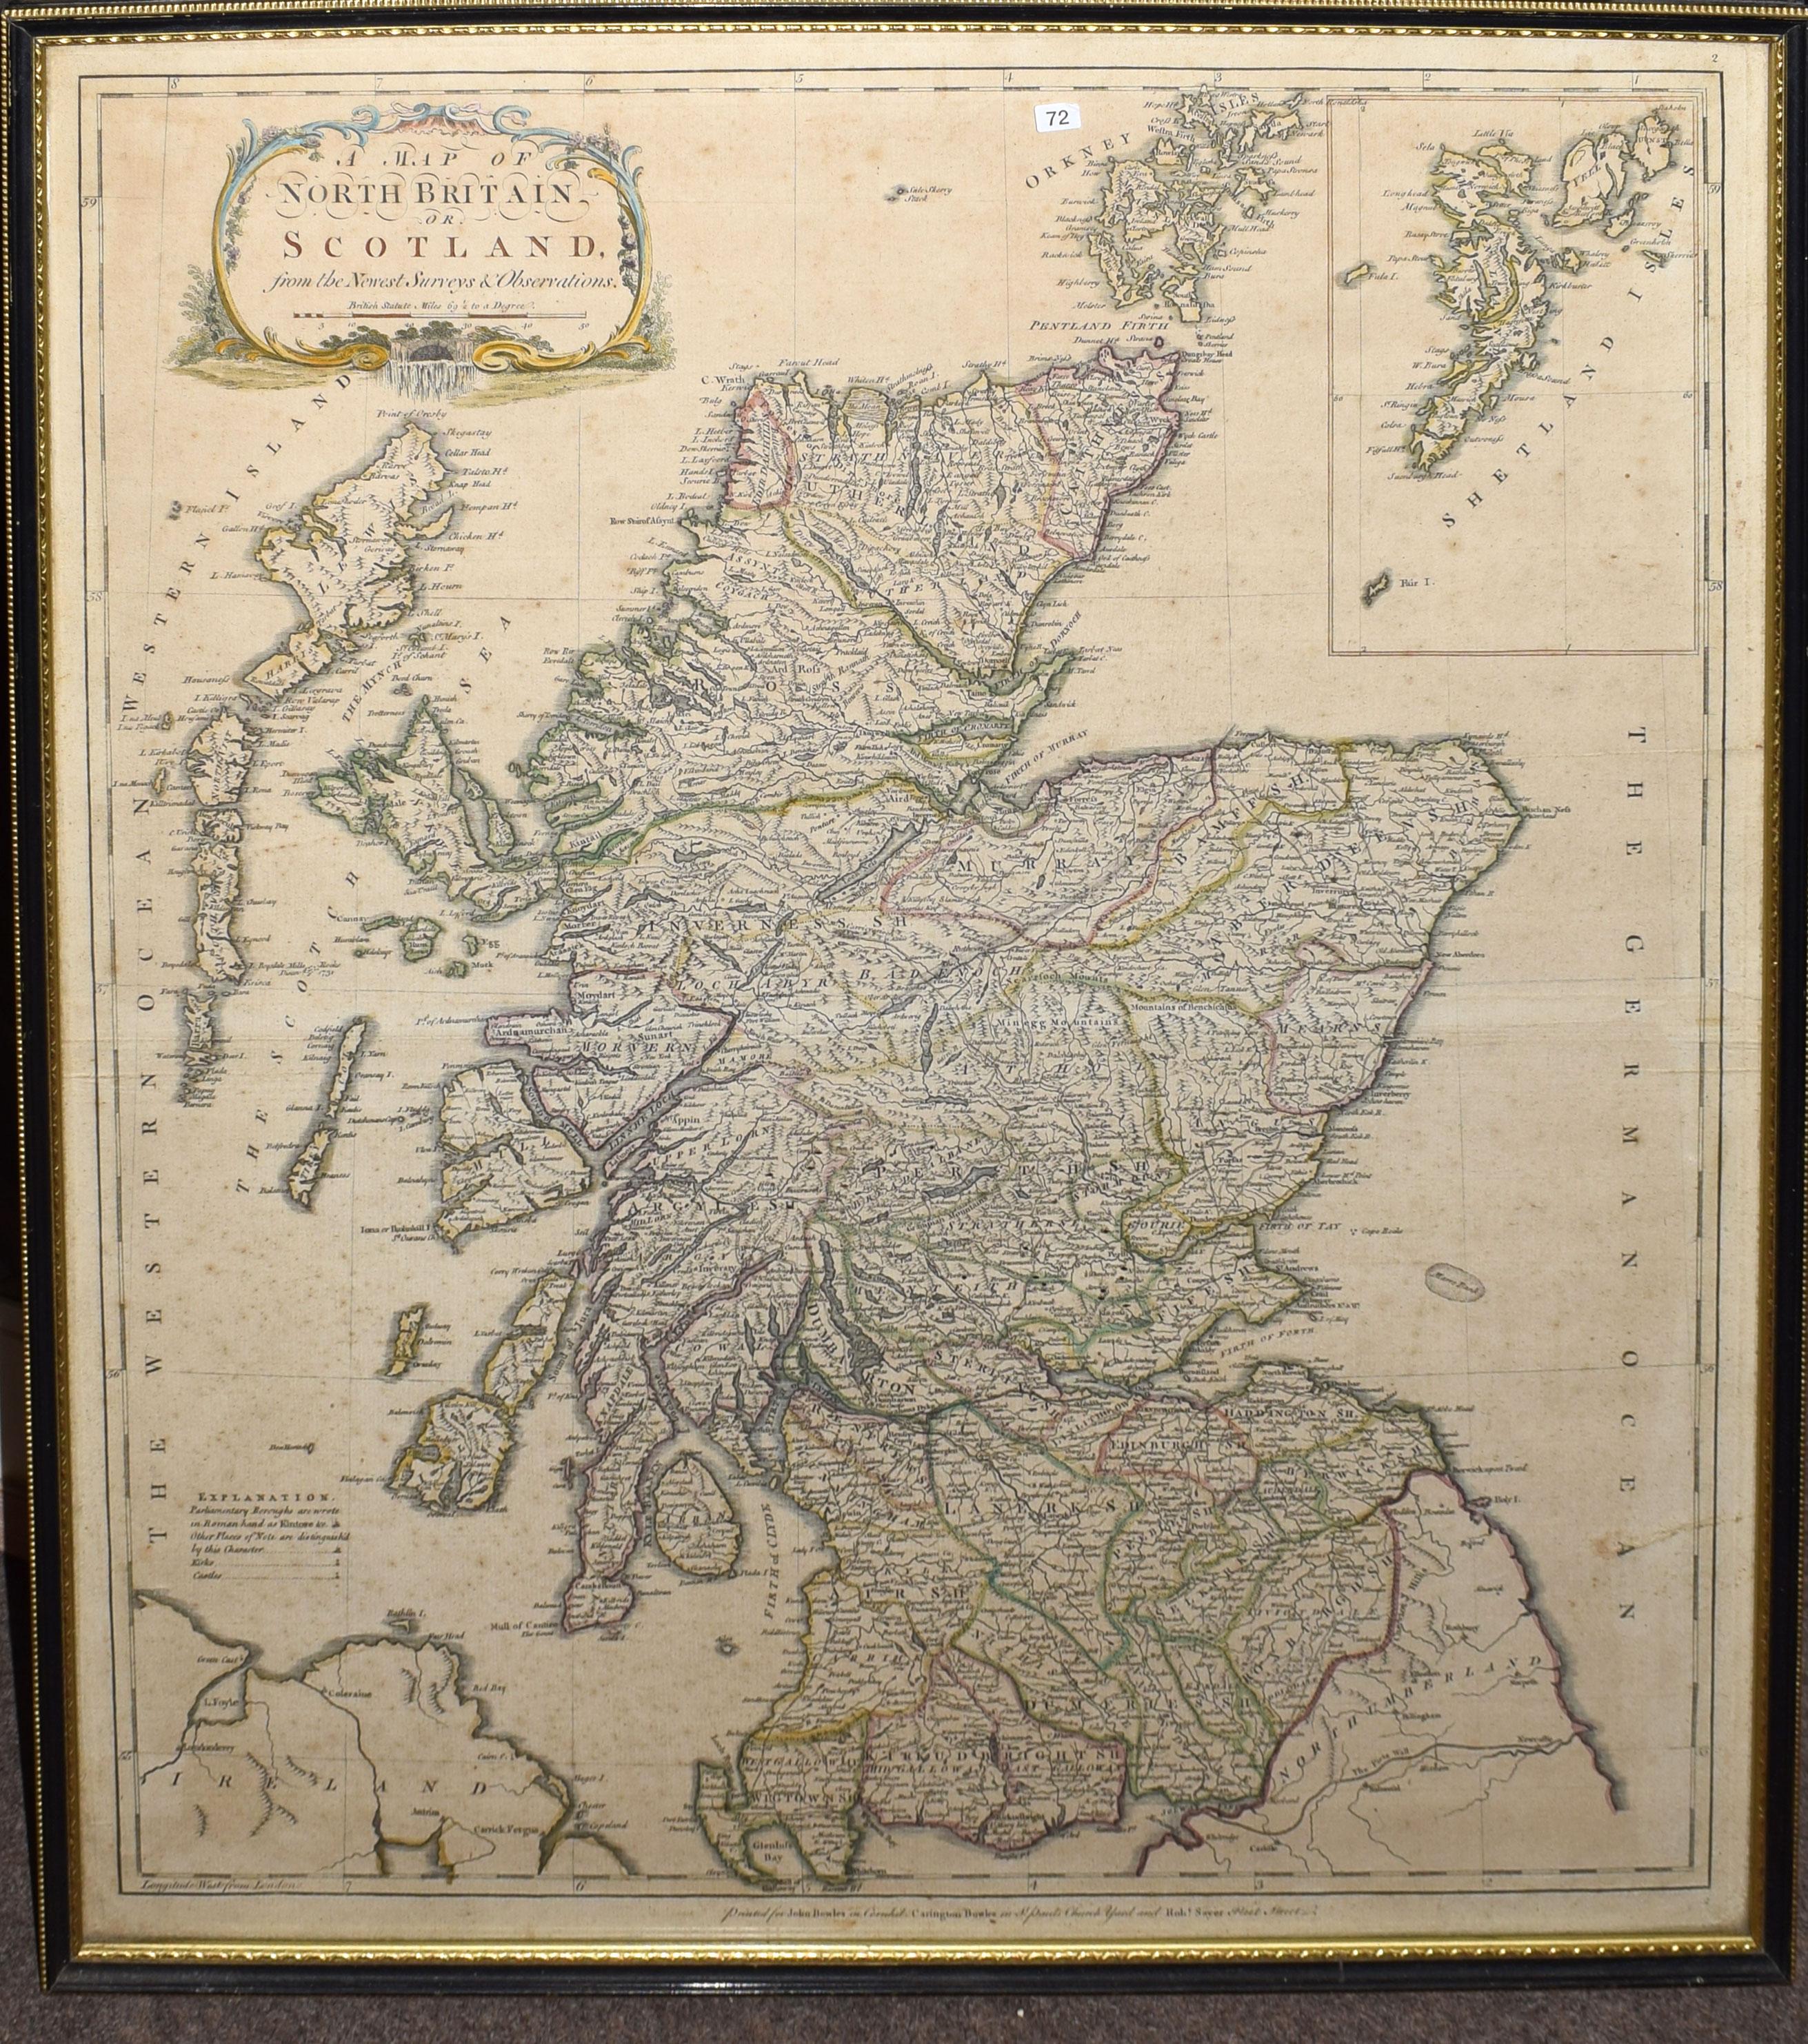 John Bowles - a map of North Britain or Scotland from the newest surveys and observations, hand